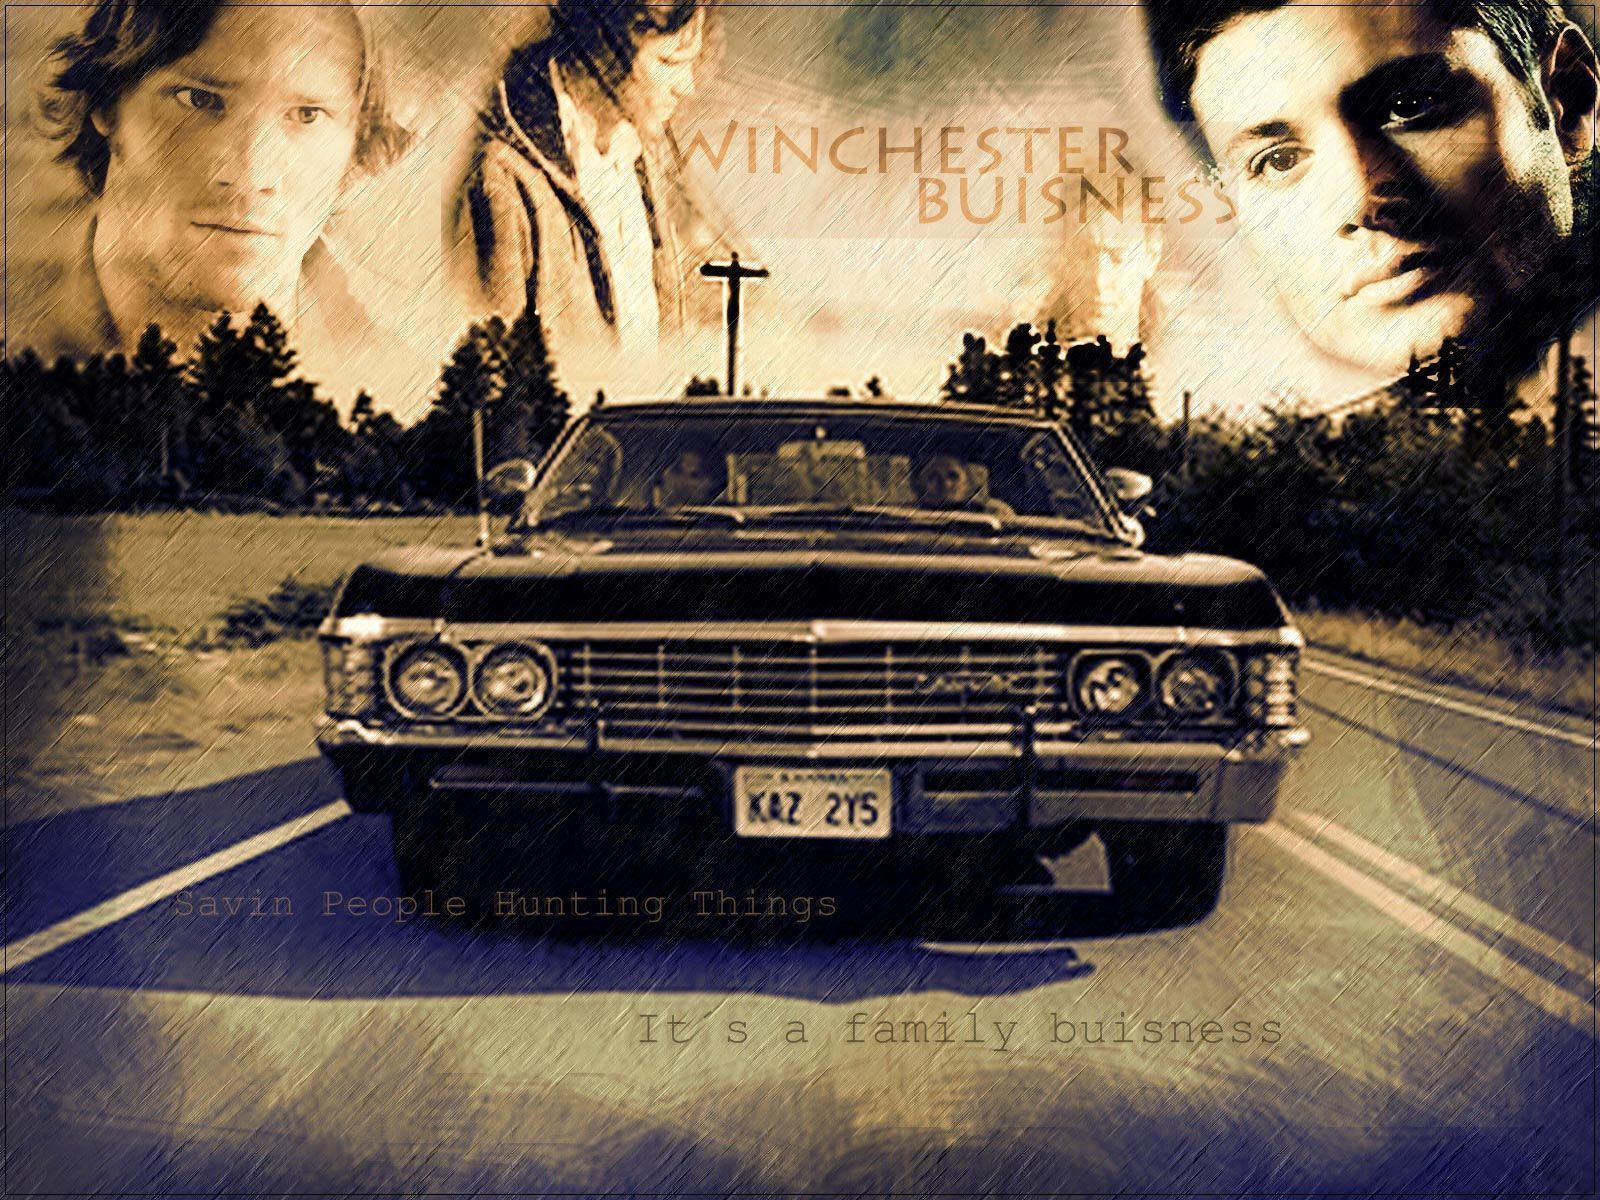 104 Supernatural HD Wallpapers | Backgrounds - Wallpaper Abyss